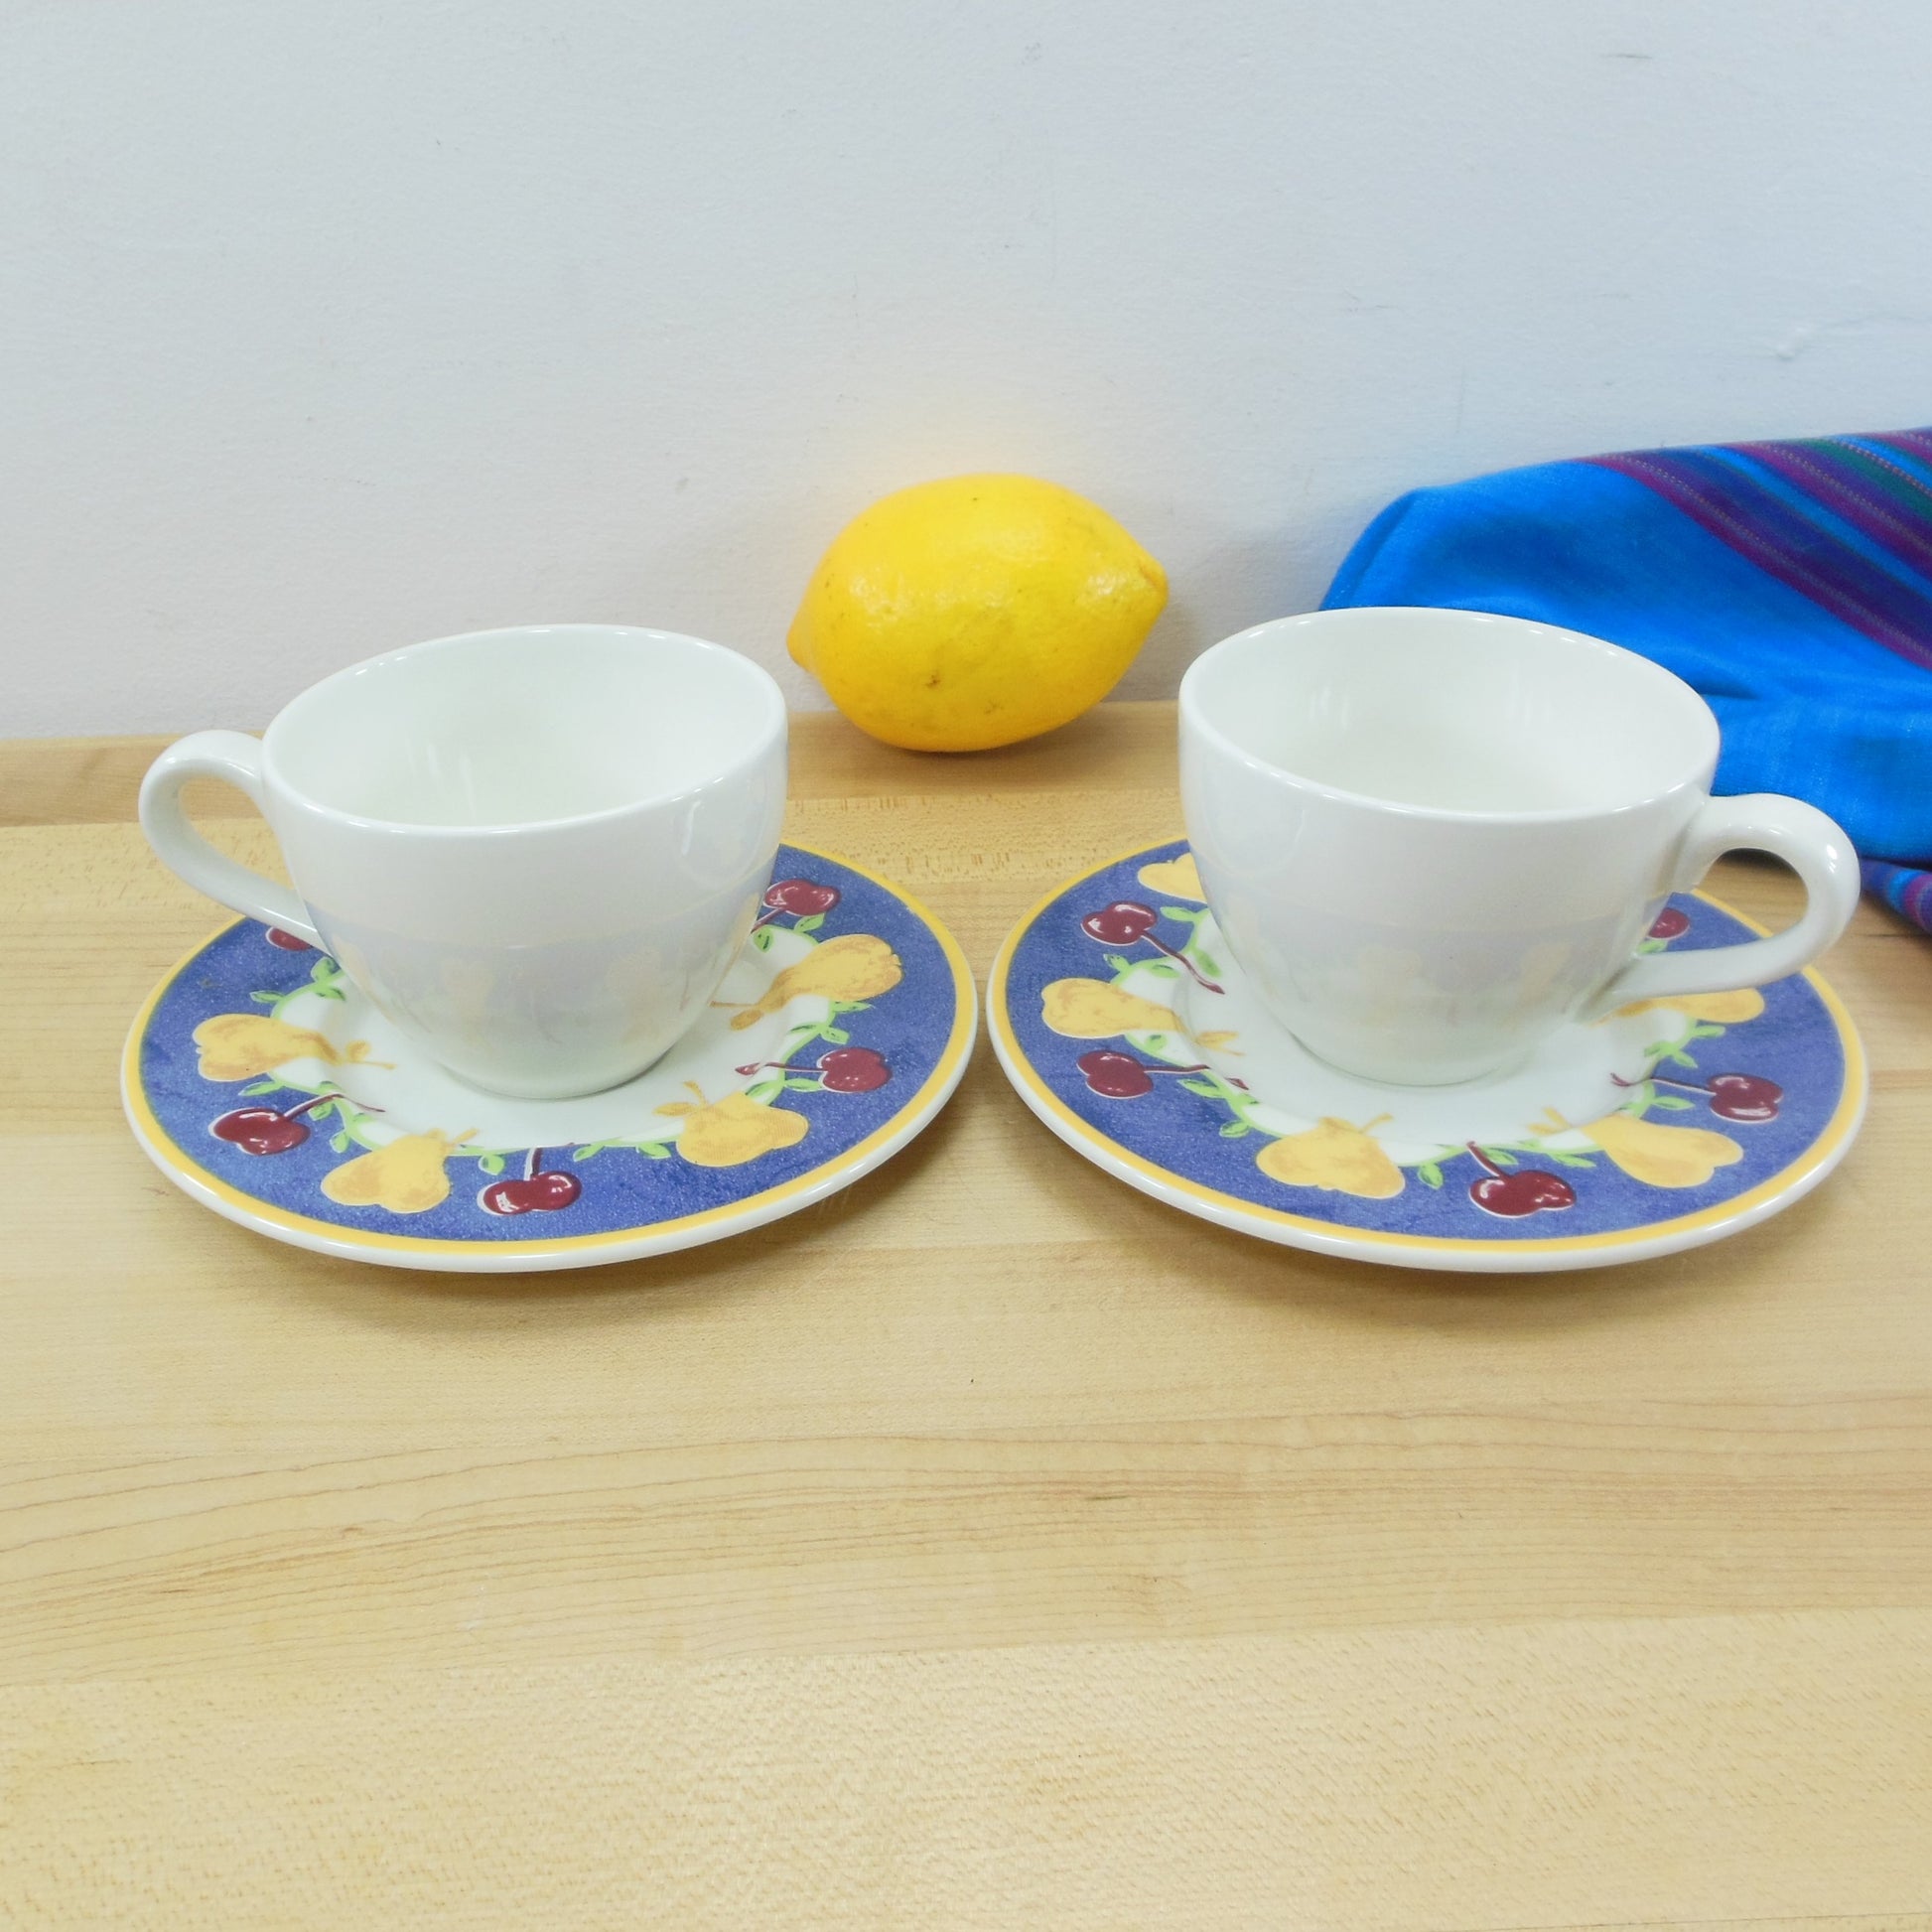 Pagnossin Italy Pair Cup & Saucer Cherry Pear Fruit Pattern